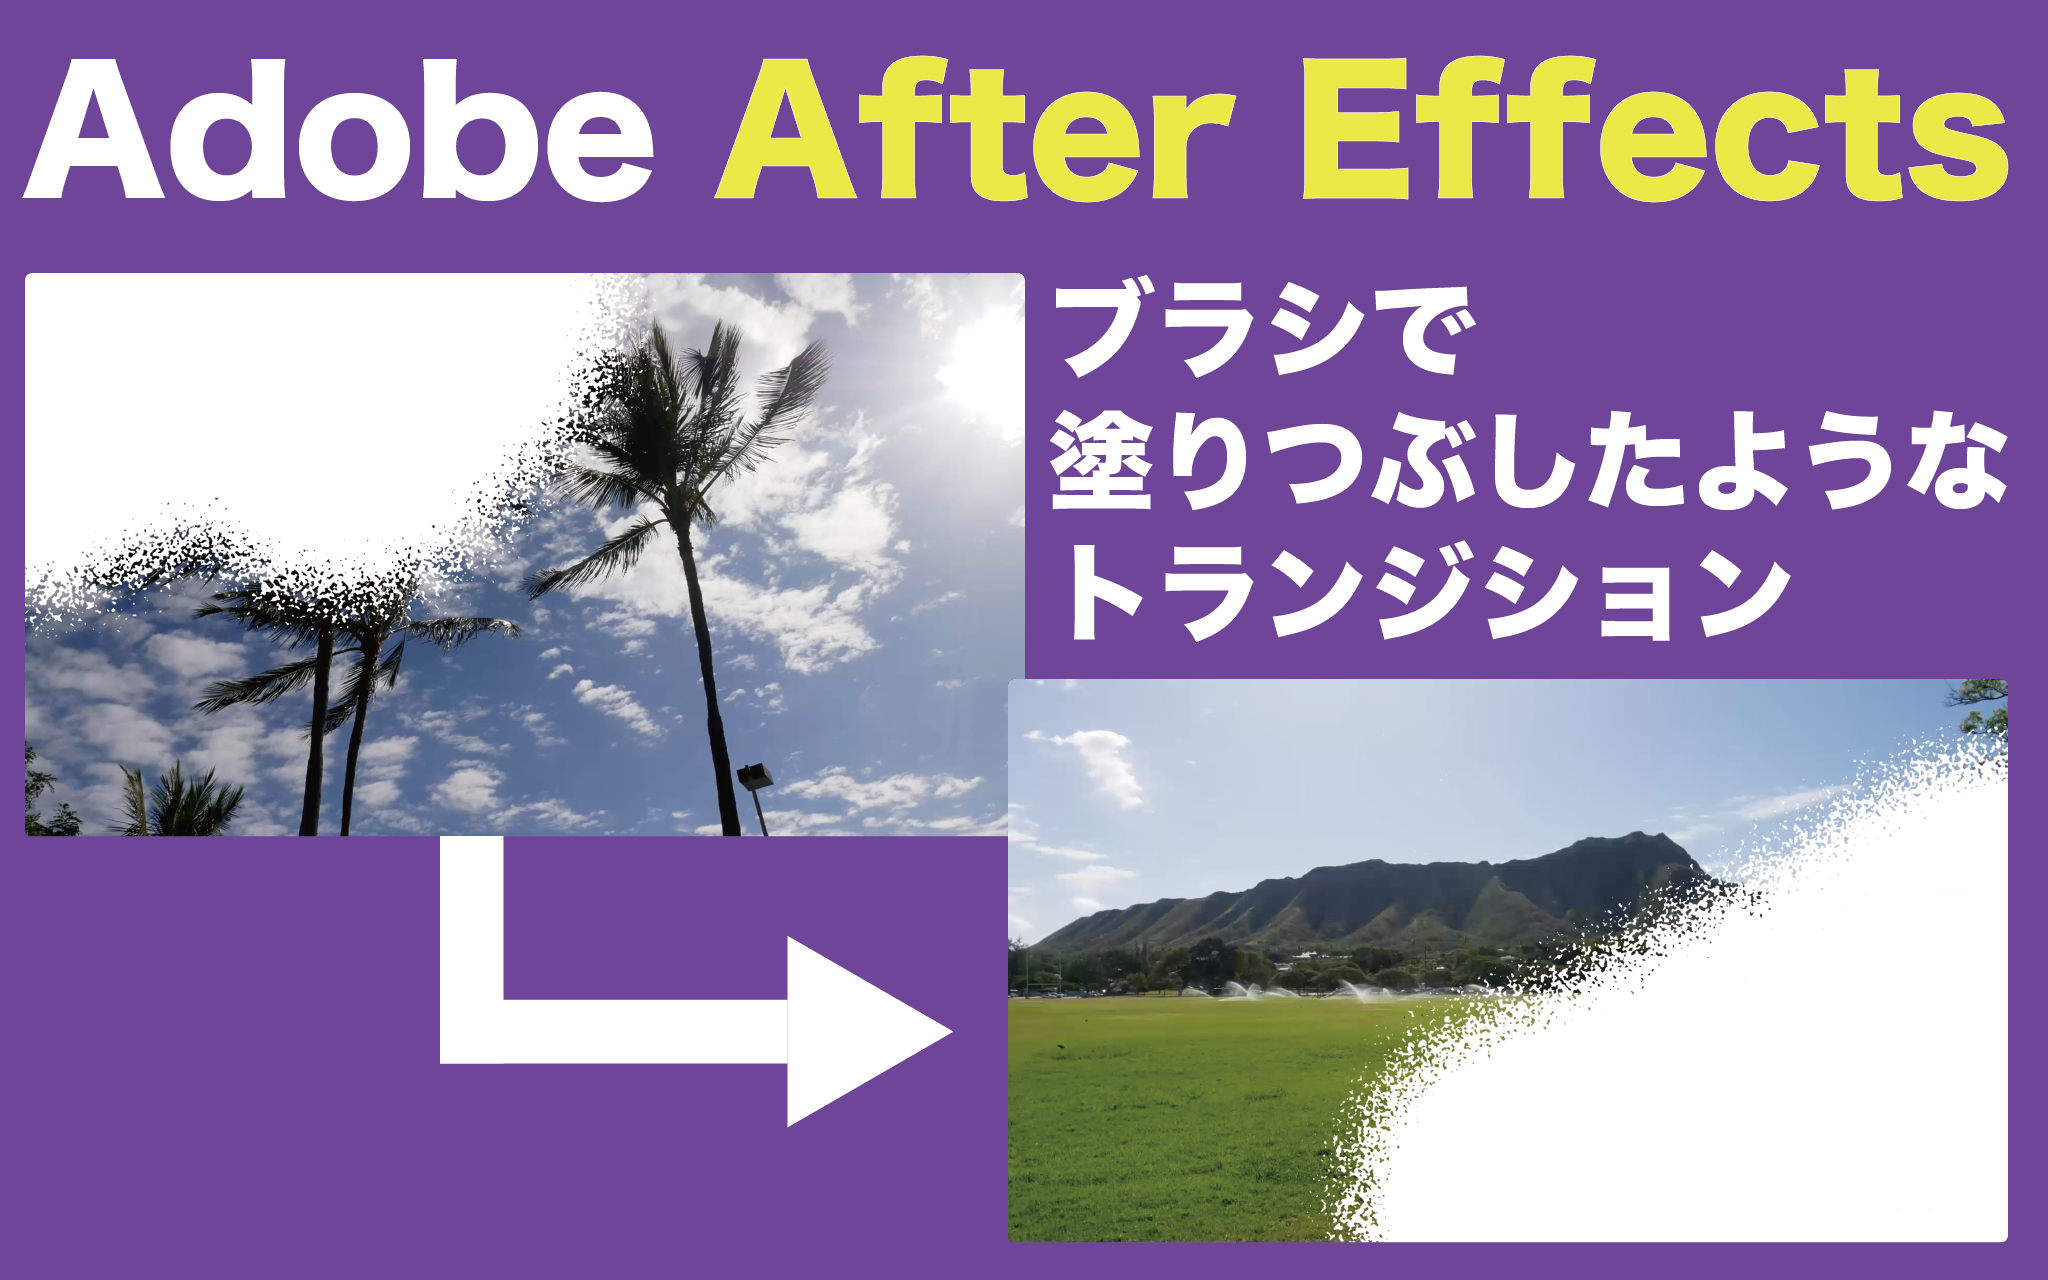 After Effects ブラシで塗りつぶしたようなトランジション